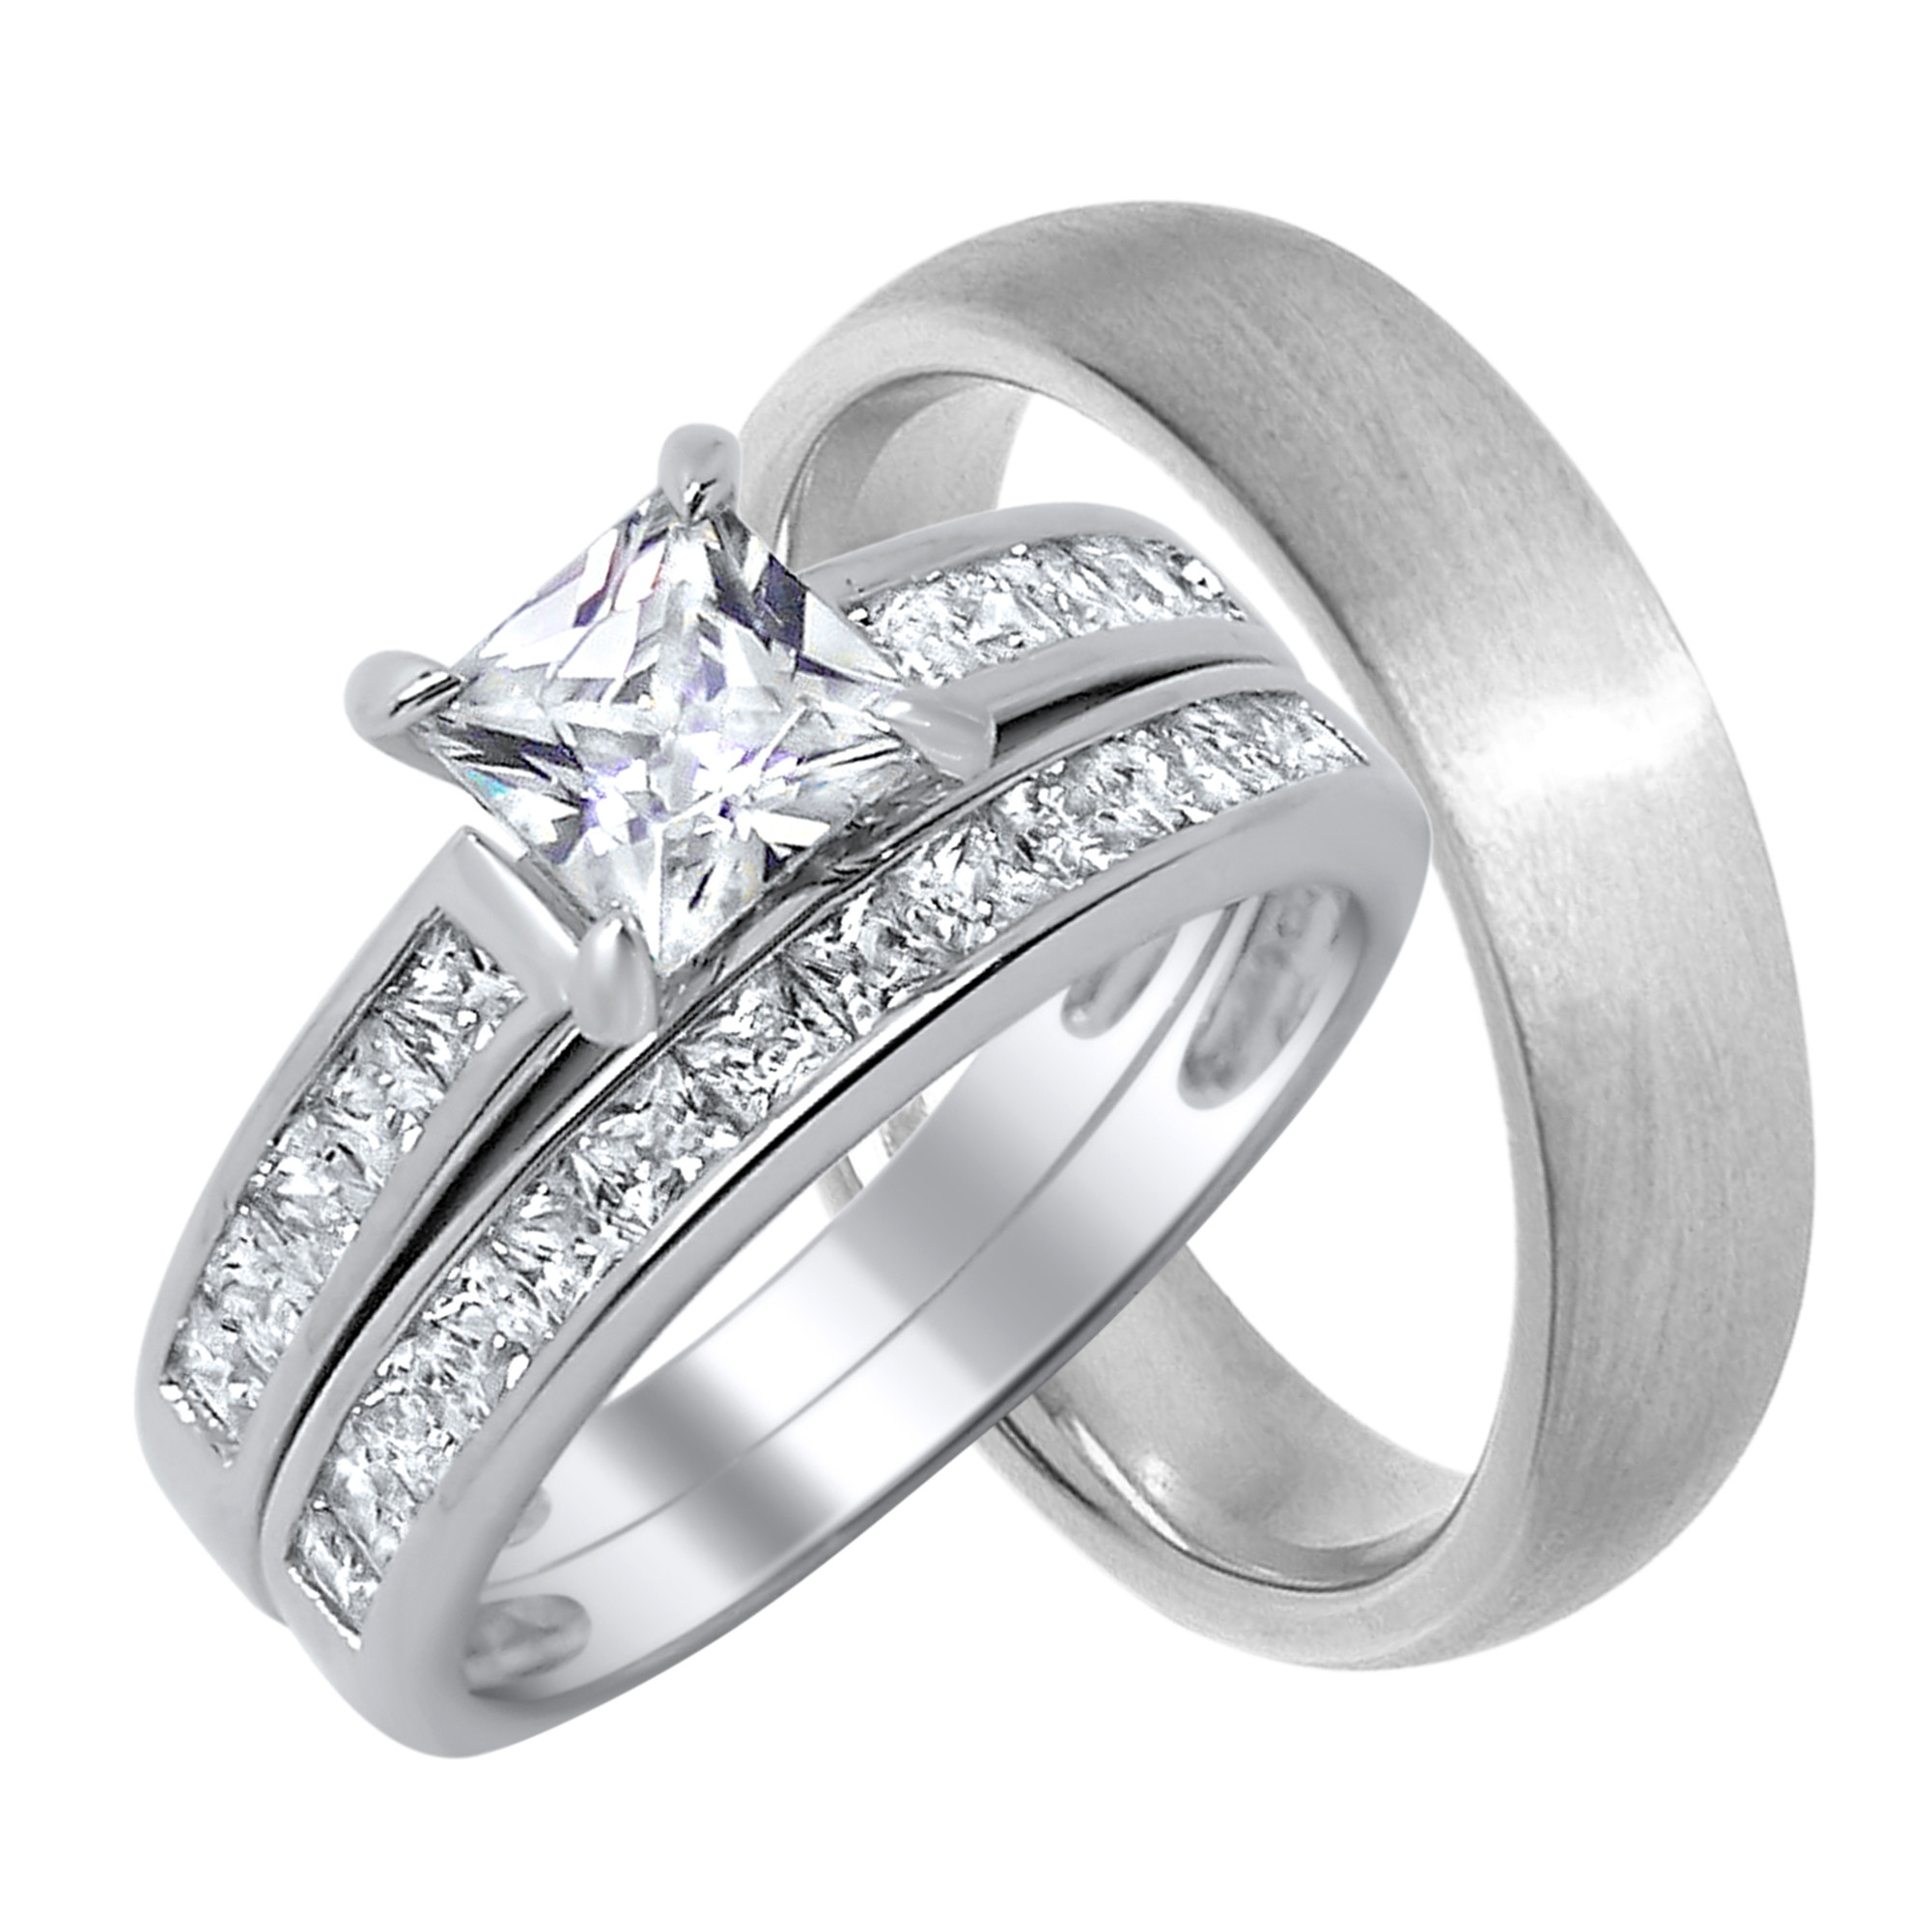 Walmart Wedding Rings Sets For Him And Her
 LaRaso & Co His and Her Wedding Ring Sets Matching Bands